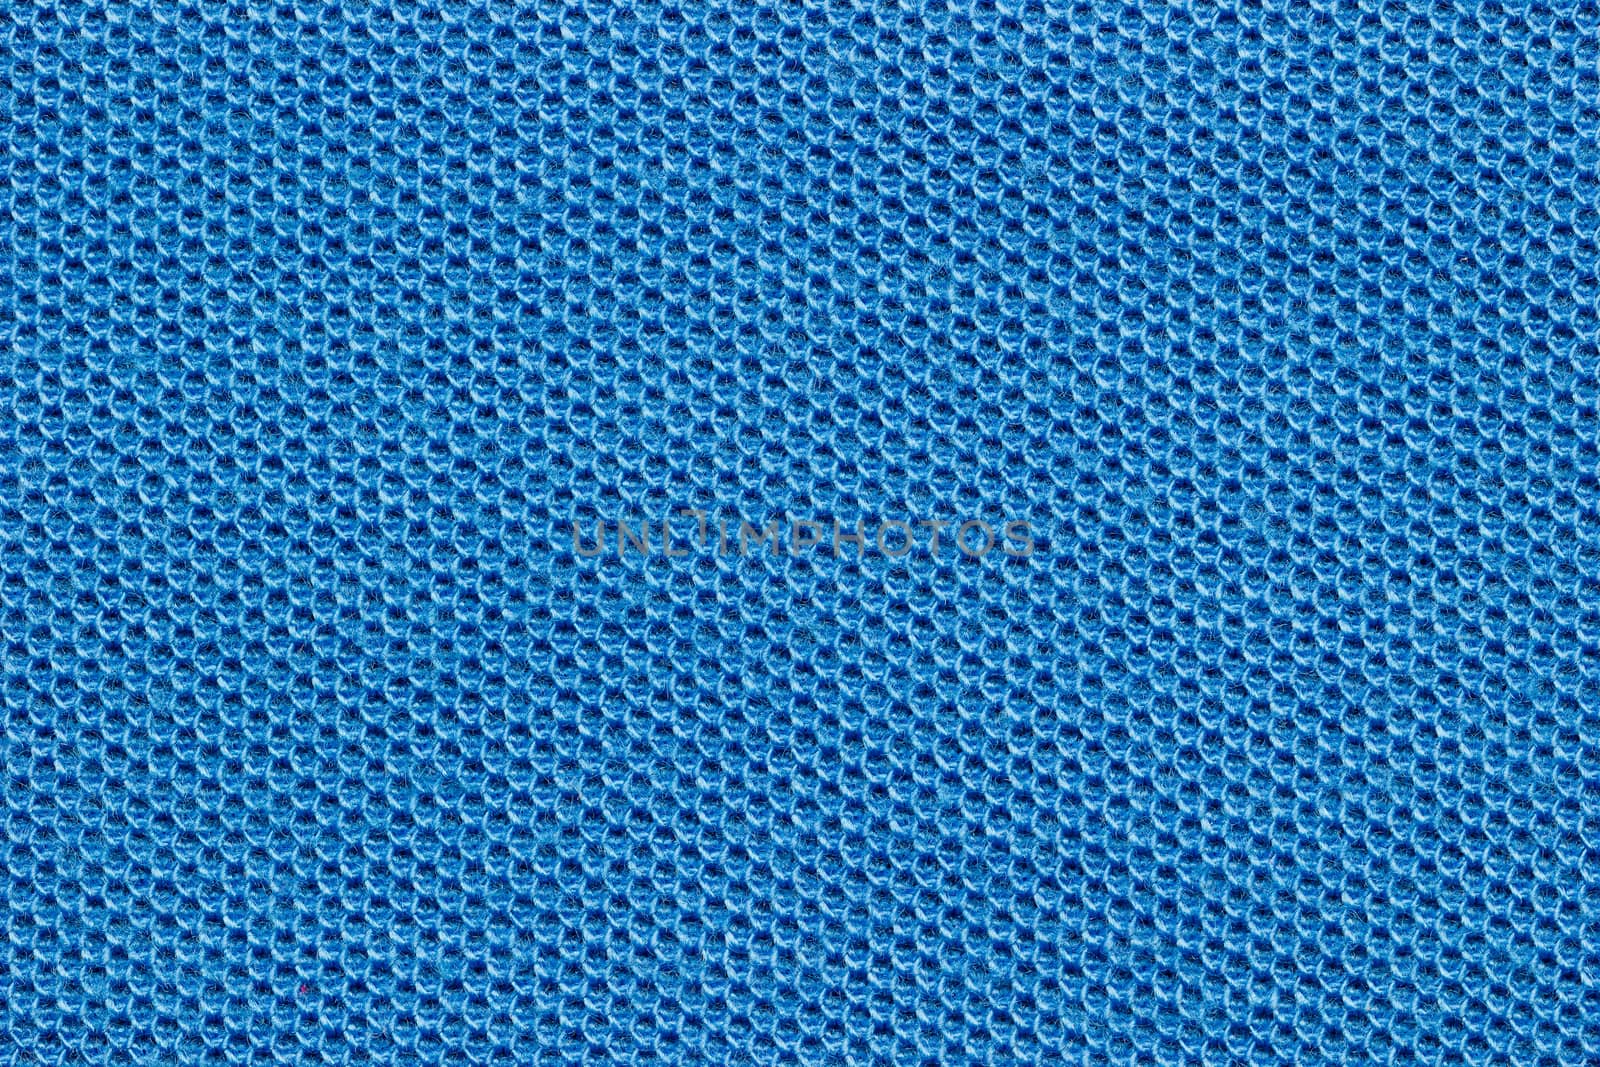 Texture of blue shirt fabric. Concept of clothes or fashion.